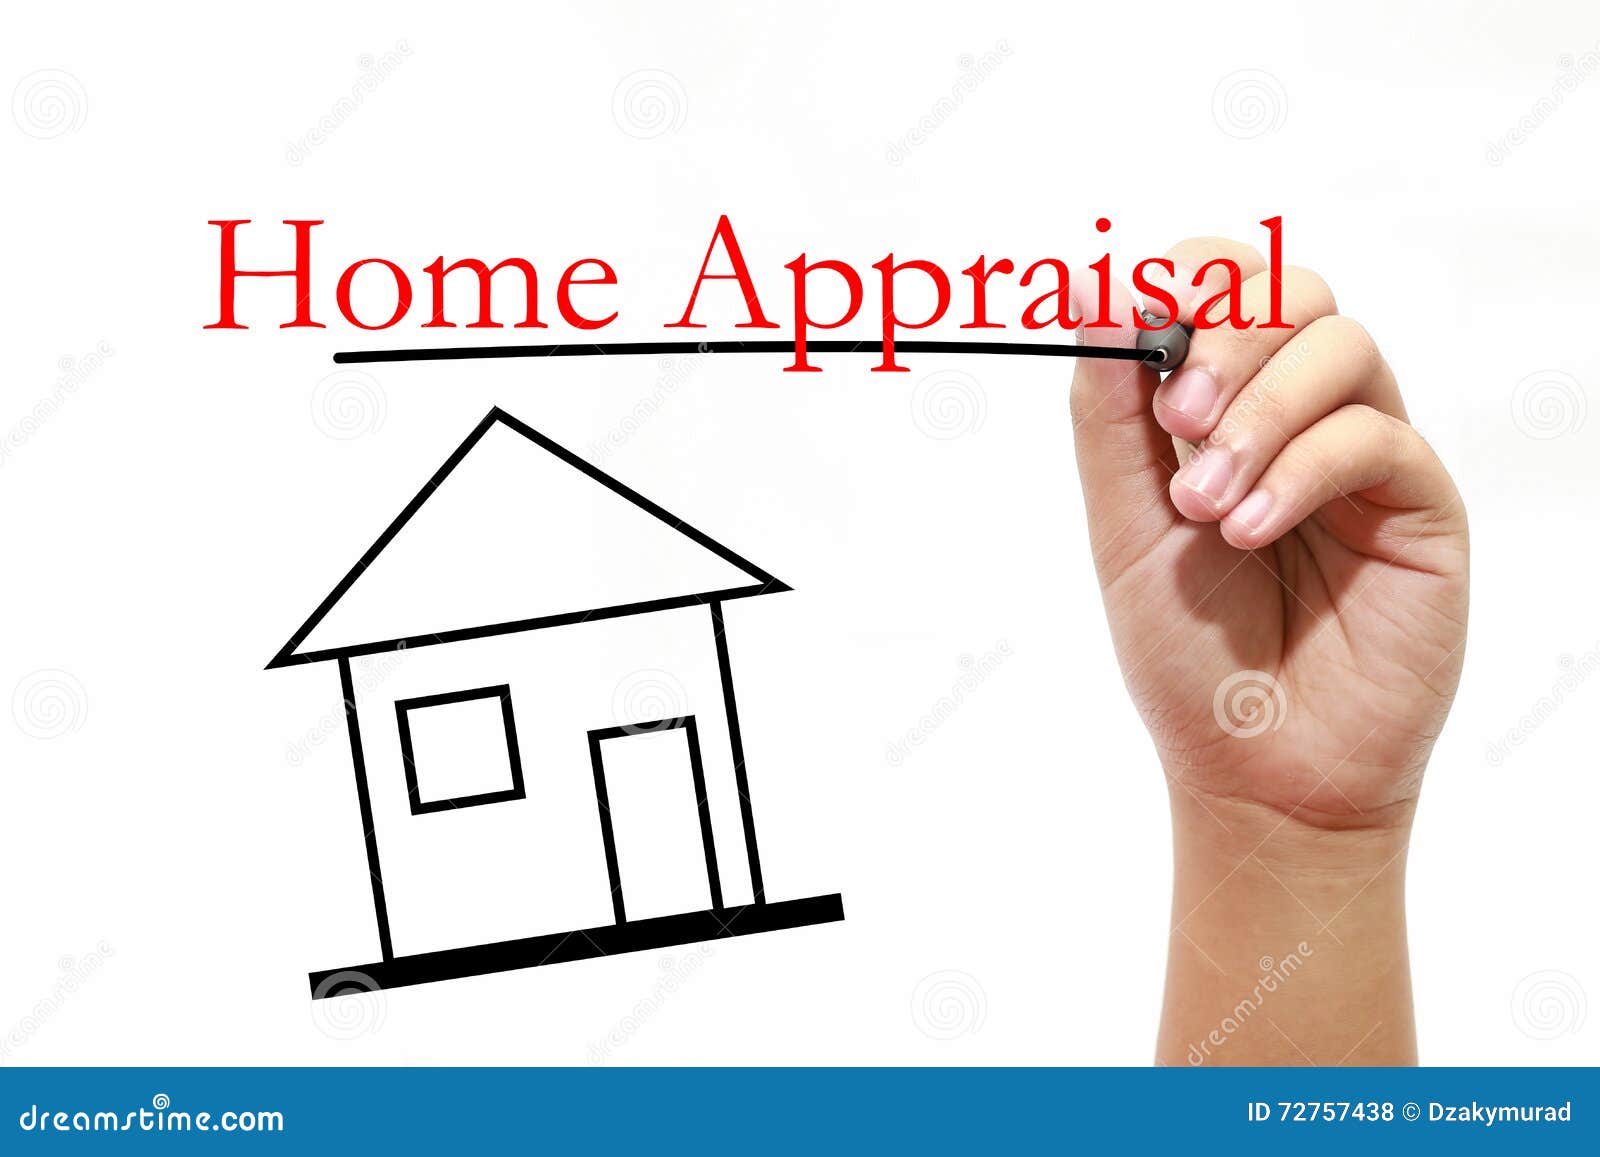 home appraisal - house with text and male hand with pen - real e